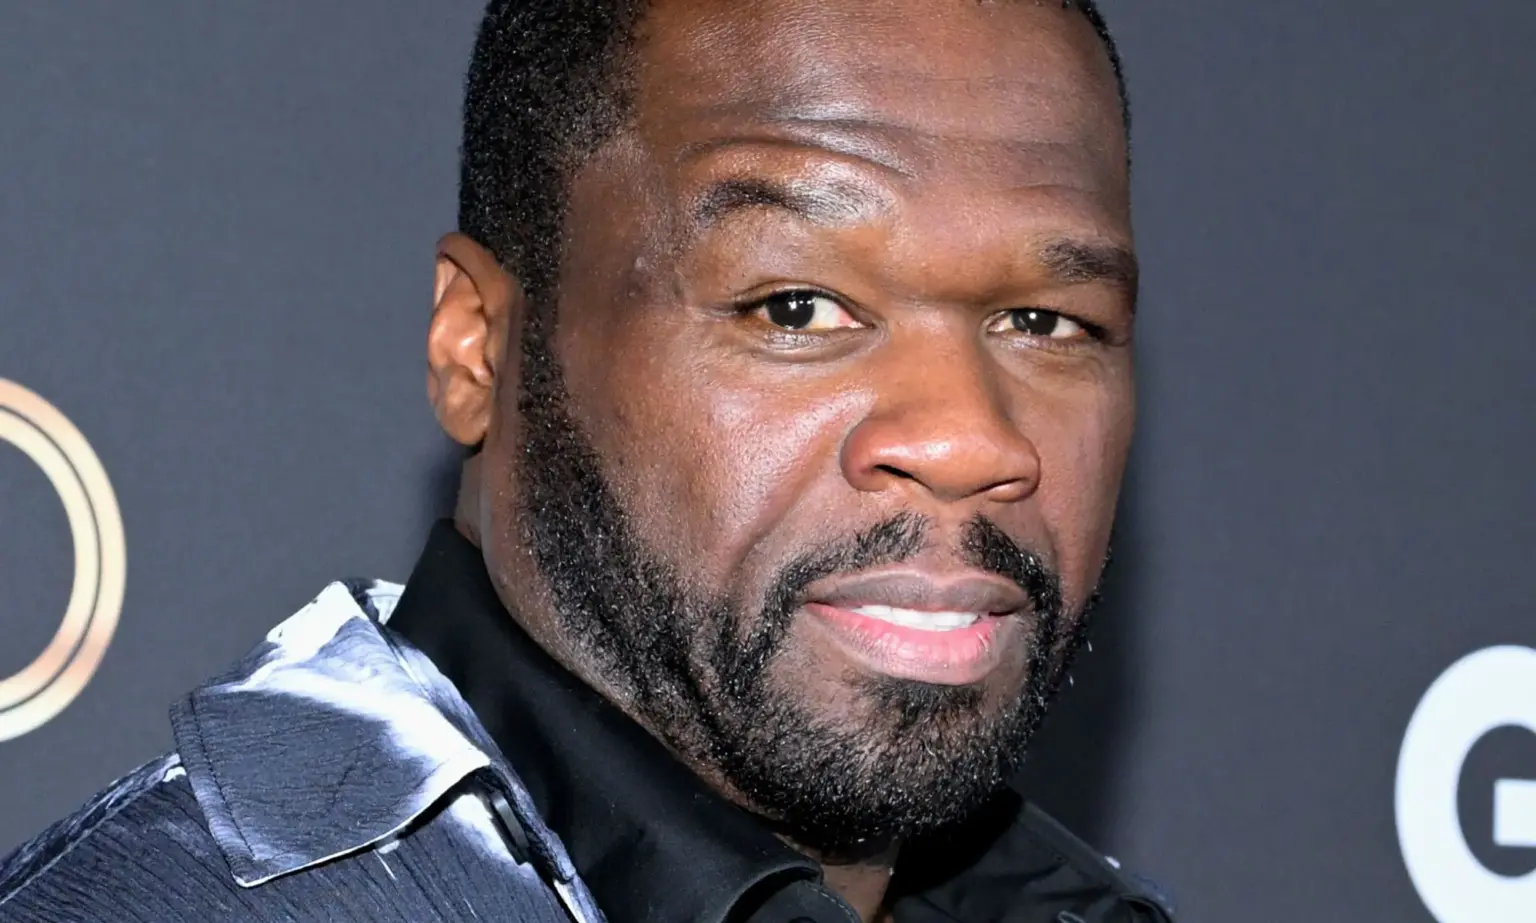 50 Cent faces bold backlash for photo with Republican.